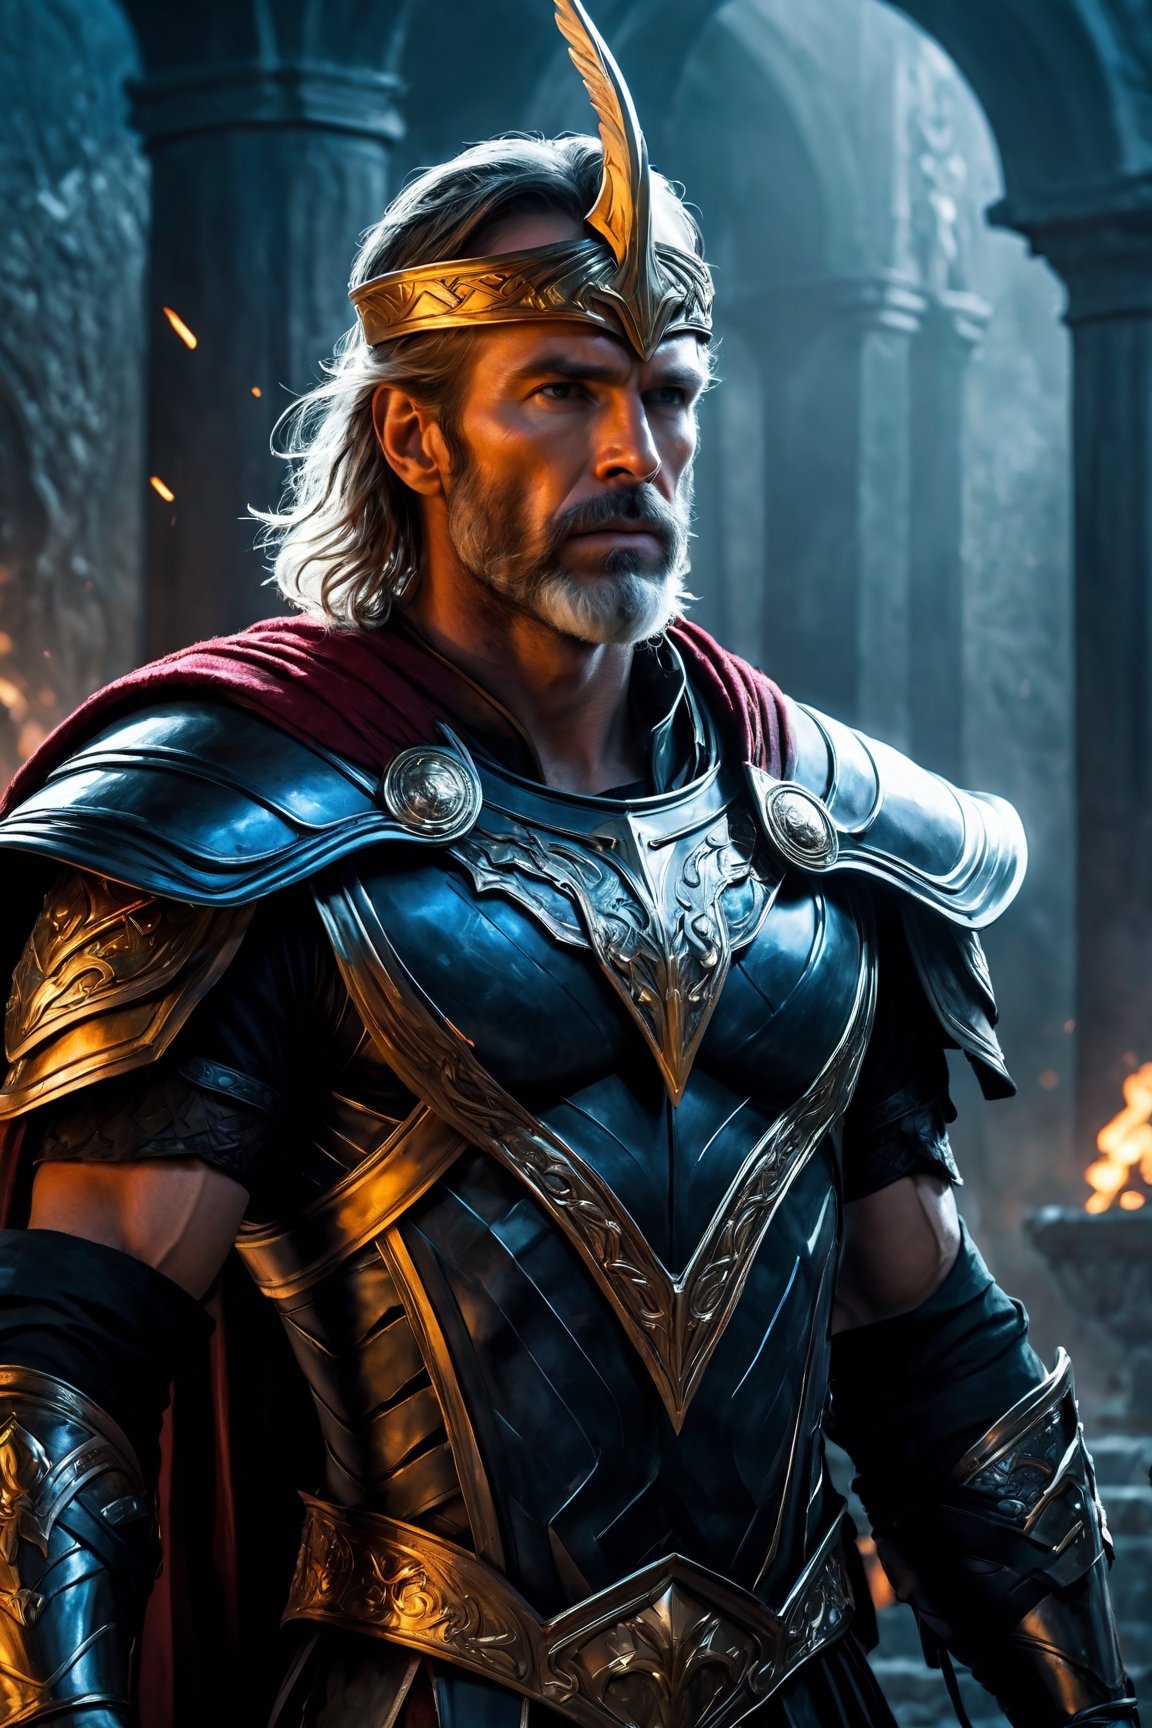 (8k HDR), (masterpiece, best quality), ((dark fantasy)),

Portrait: Thadeus in Regal Armor:

"Generate a close-up portrait of Thadeus, the God of Thunder and the Underworld, wearing regal armor that blends elements of Thor's iconic attire with the dark, imposing aesthetic of Hades. His expression is solemn yet commanding, reflecting his dual role as ruler of both realms."

dark and vibrant, (micheal bay cinematic shots), depth of field, cinematic scenery, 2D